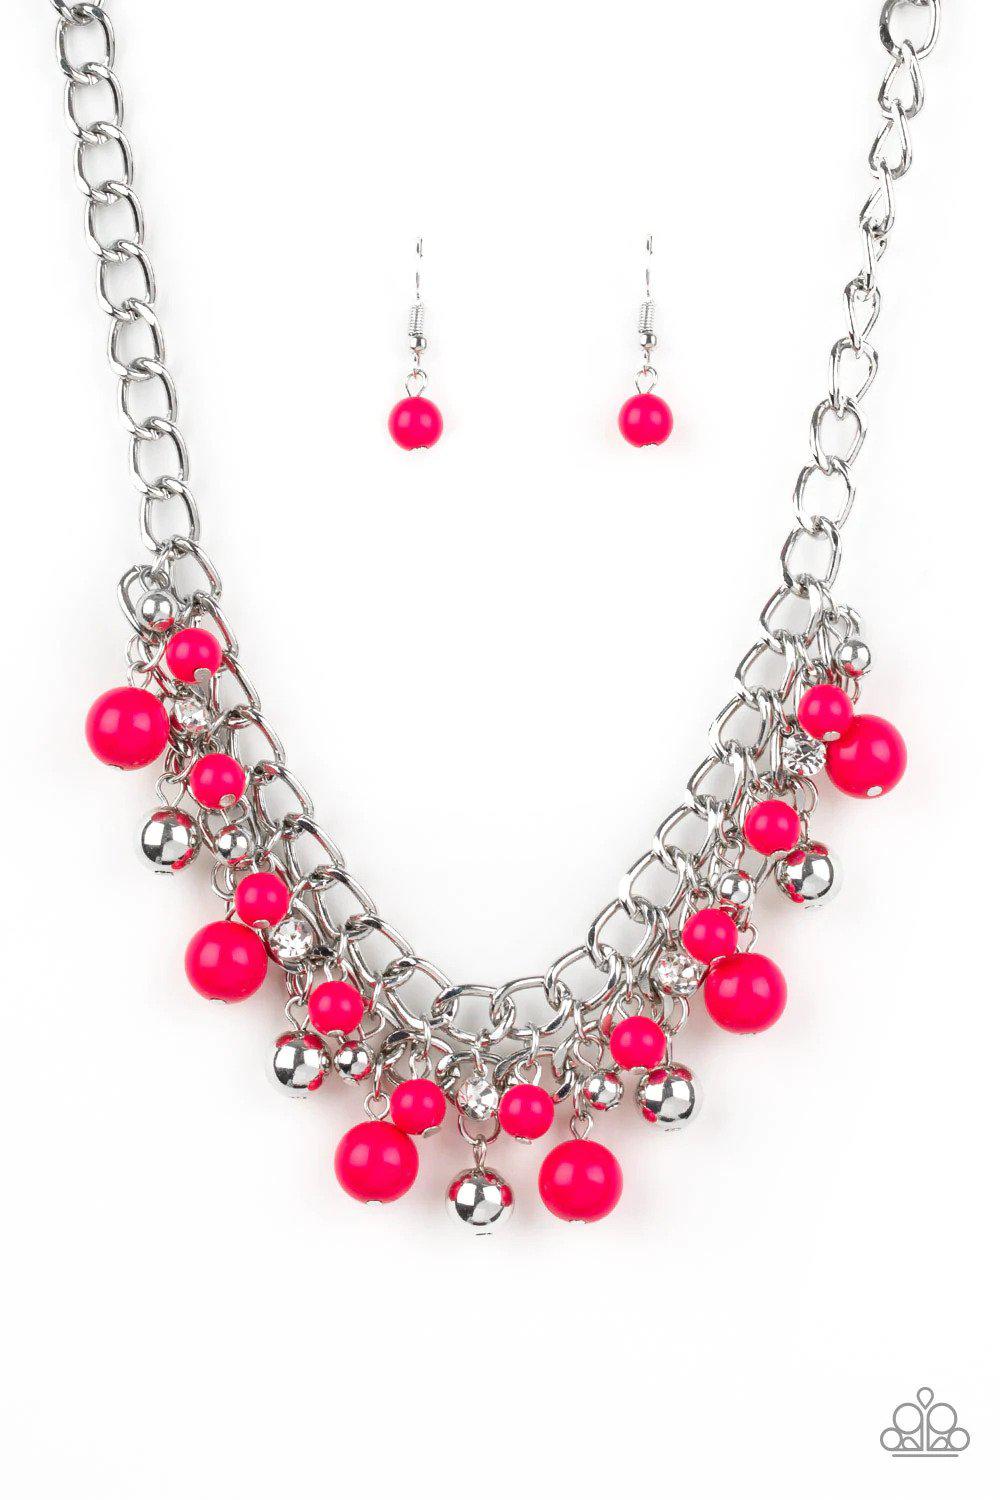 The Bride To BEAD Pink Necklace - Paparazzi Accessories- lightbox - CarasShop.com - $5 Jewelry by Cara Jewels